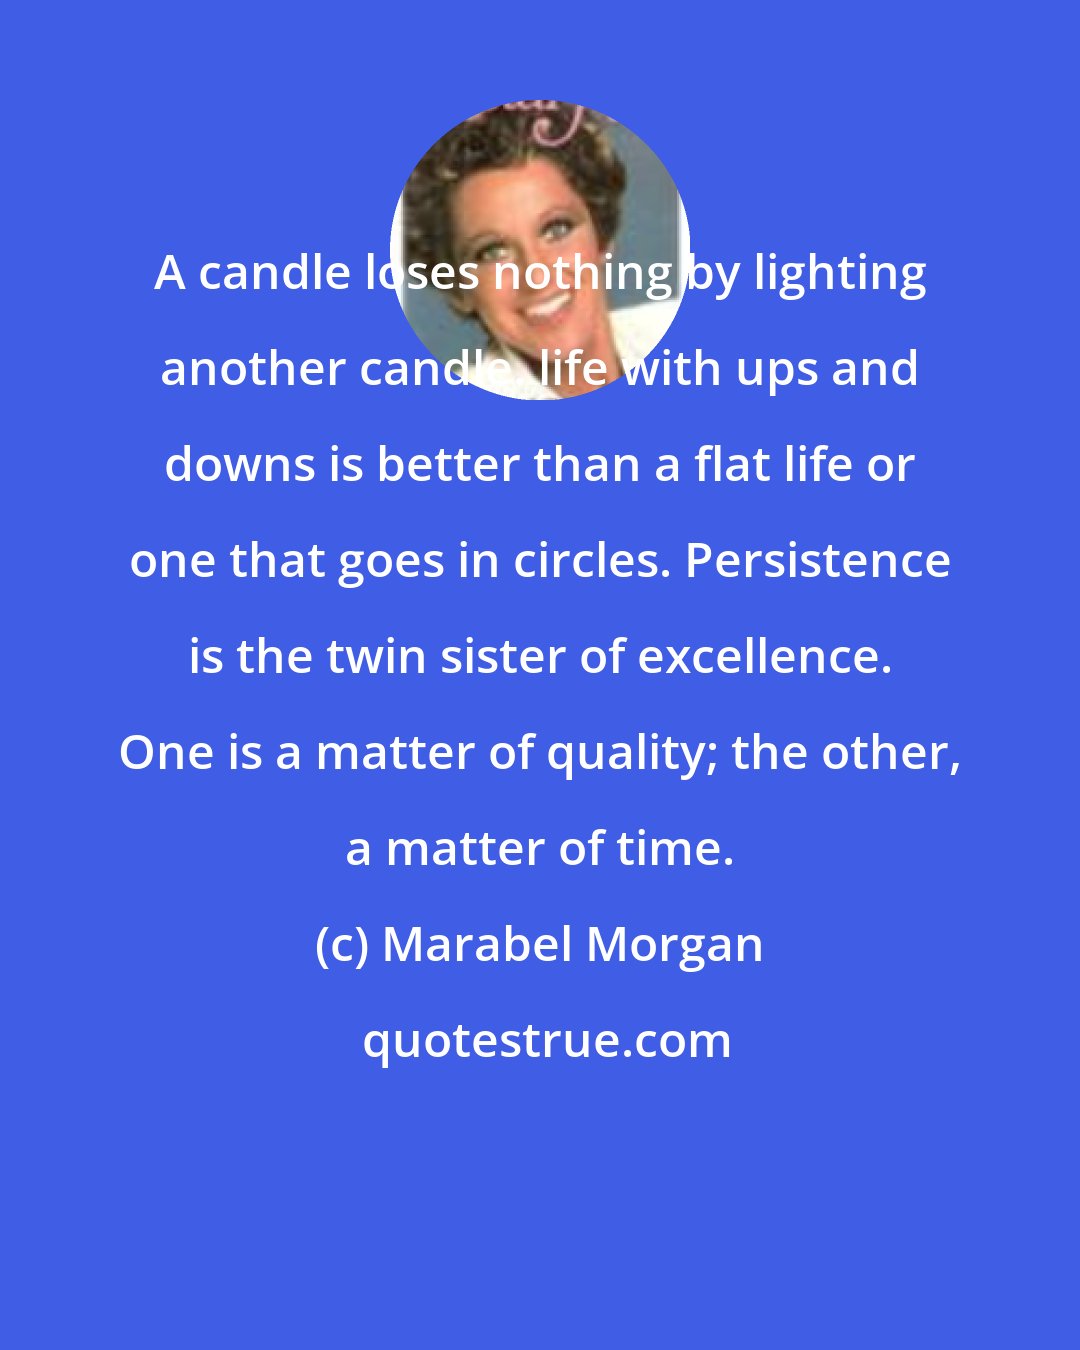 Marabel Morgan: A candle loses nothing by lighting another candle. life with ups and downs is better than a flat life or one that goes in circles. Persistence is the twin sister of excellence. One is a matter of quality; the other, a matter of time.